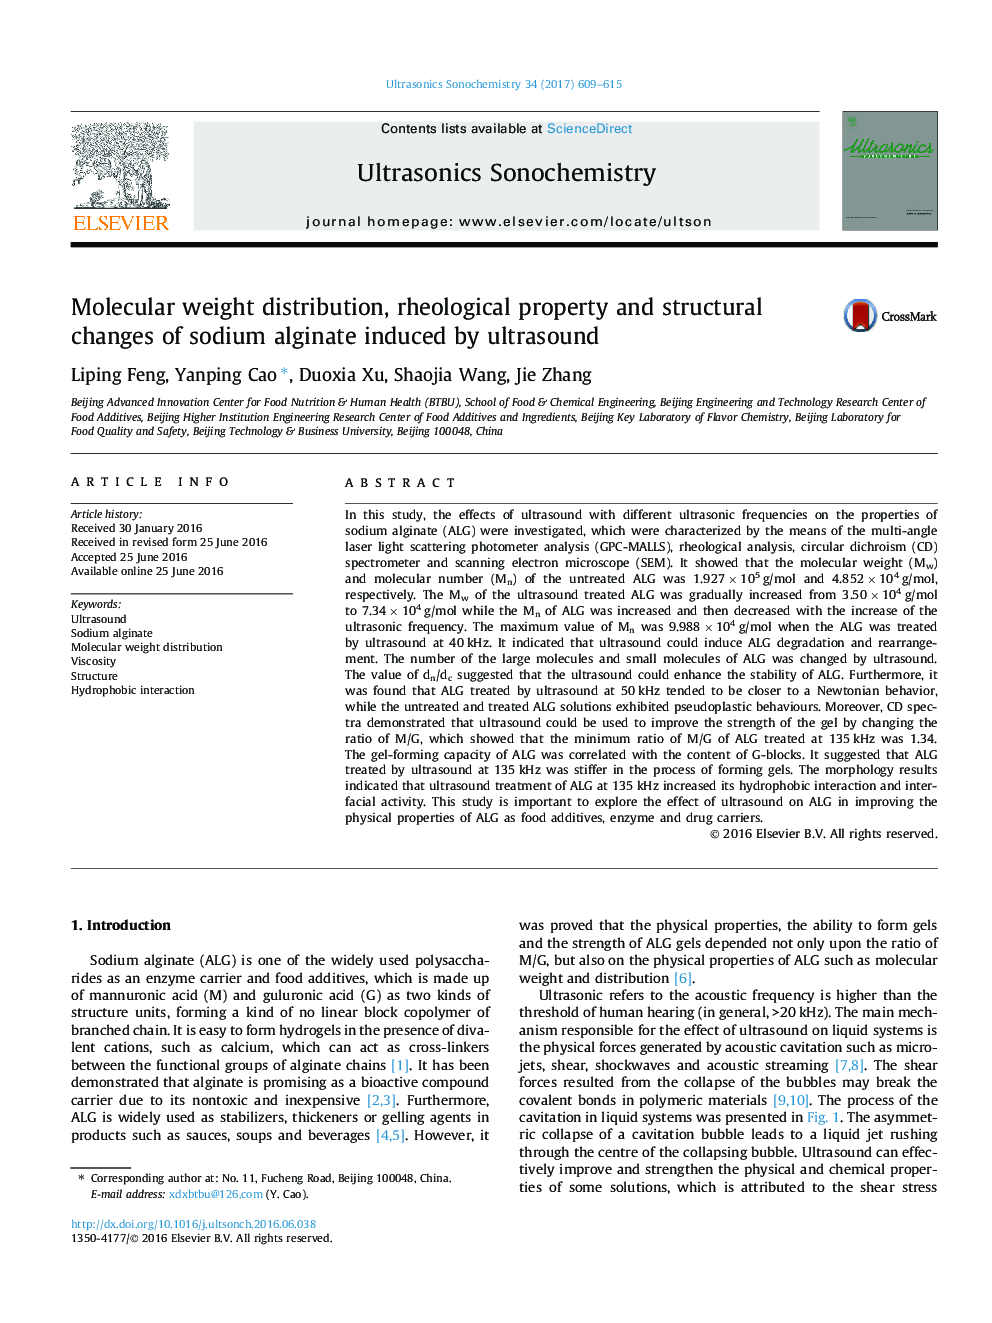 Molecular weight distribution, rheological property and structural changes of sodium alginate induced by ultrasound